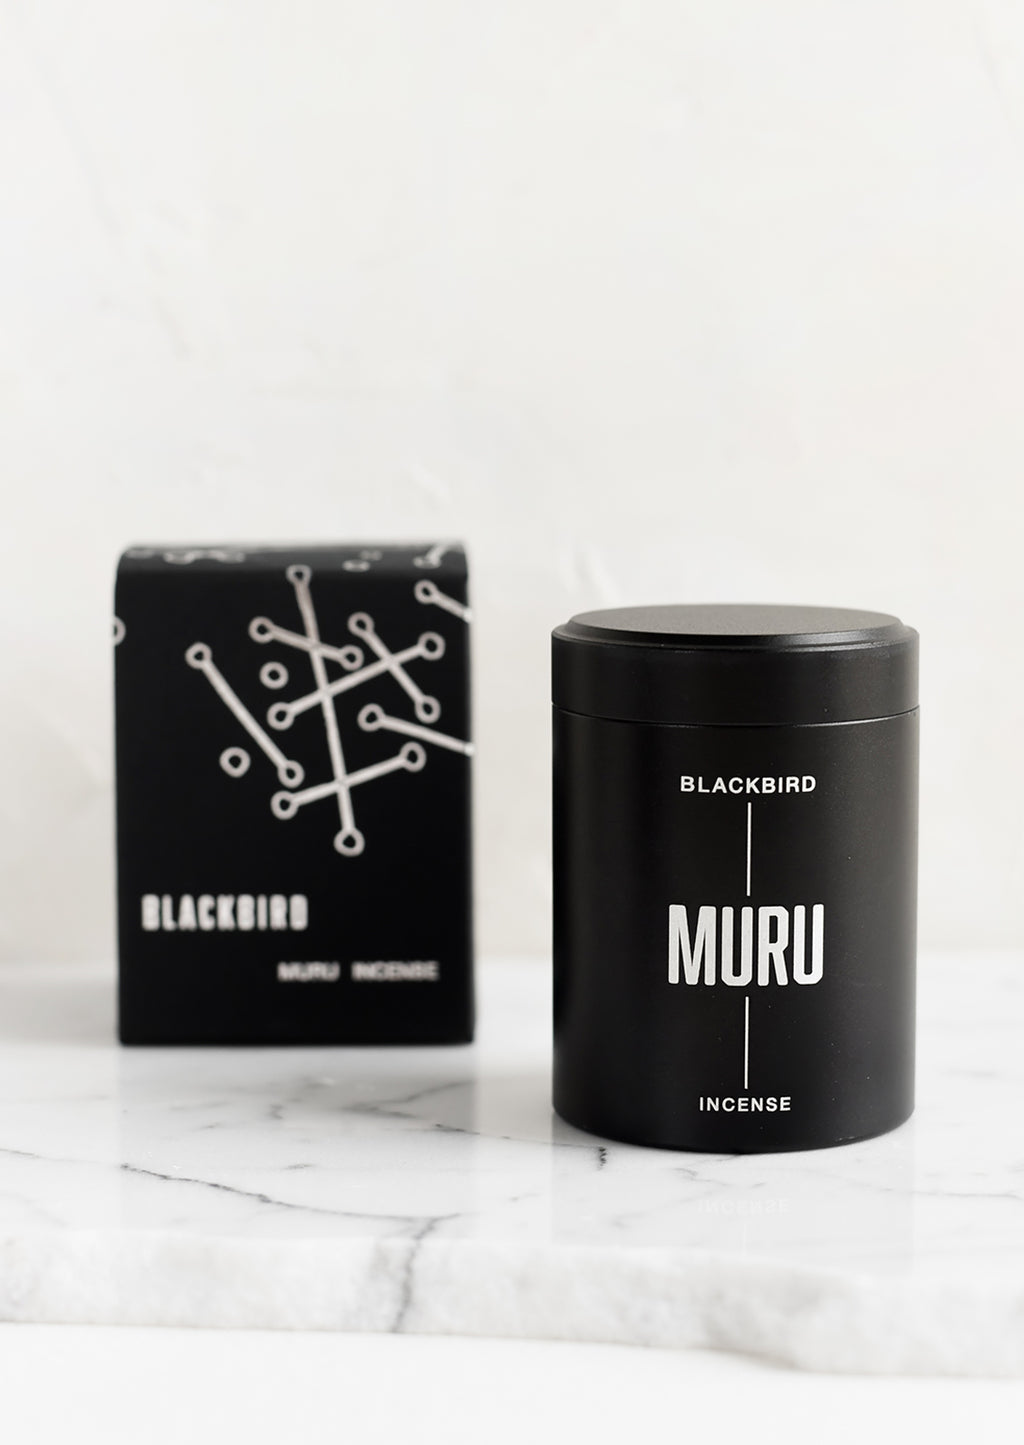 Muru: A black incense tin with black and silver packaging.